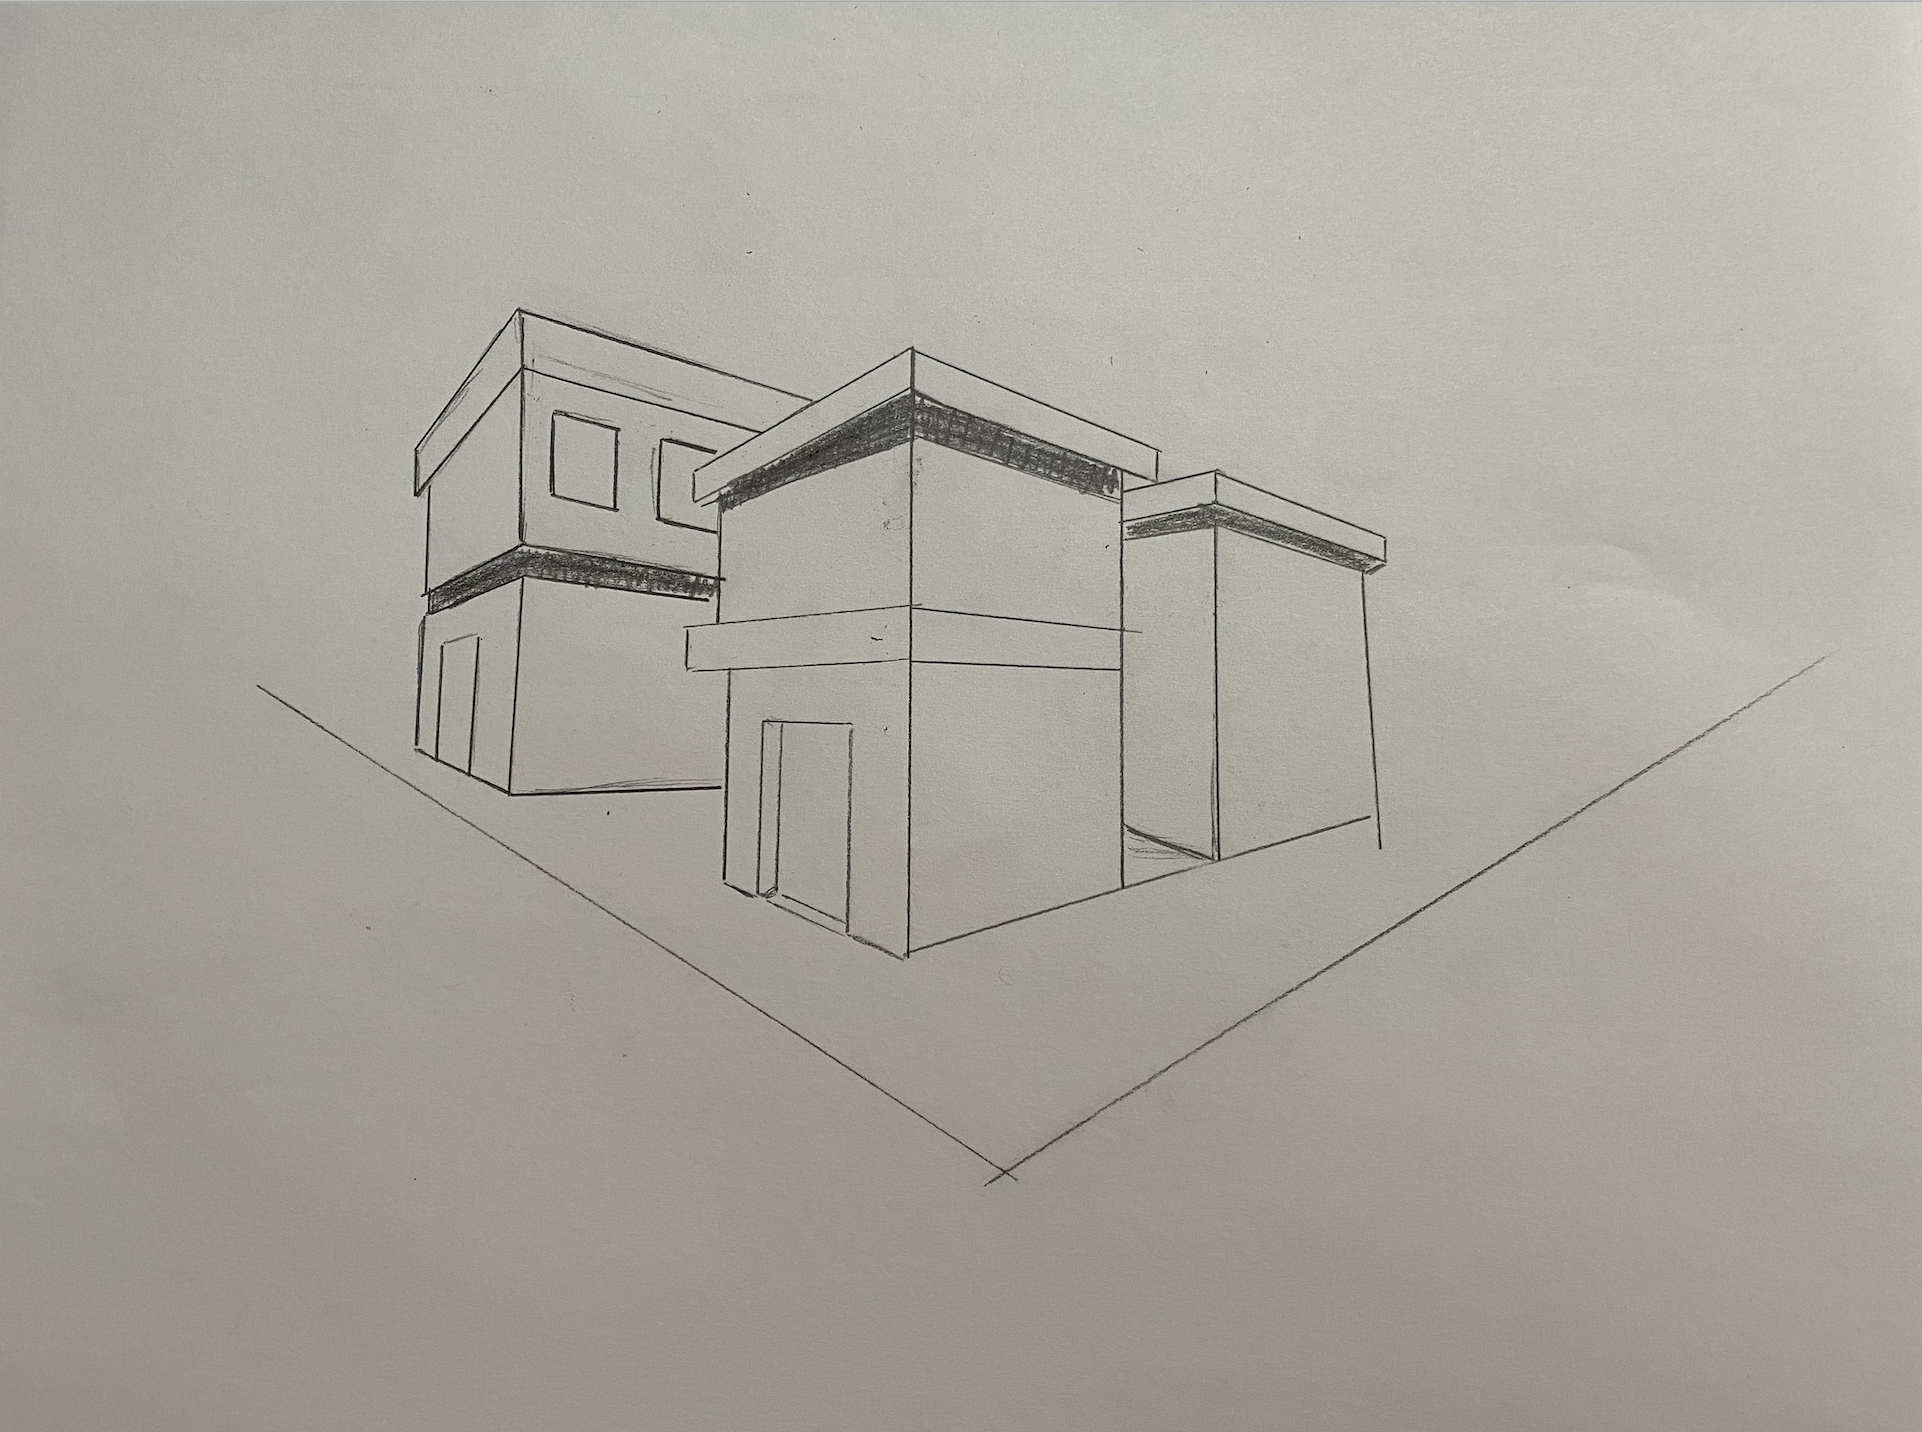 two point perspective